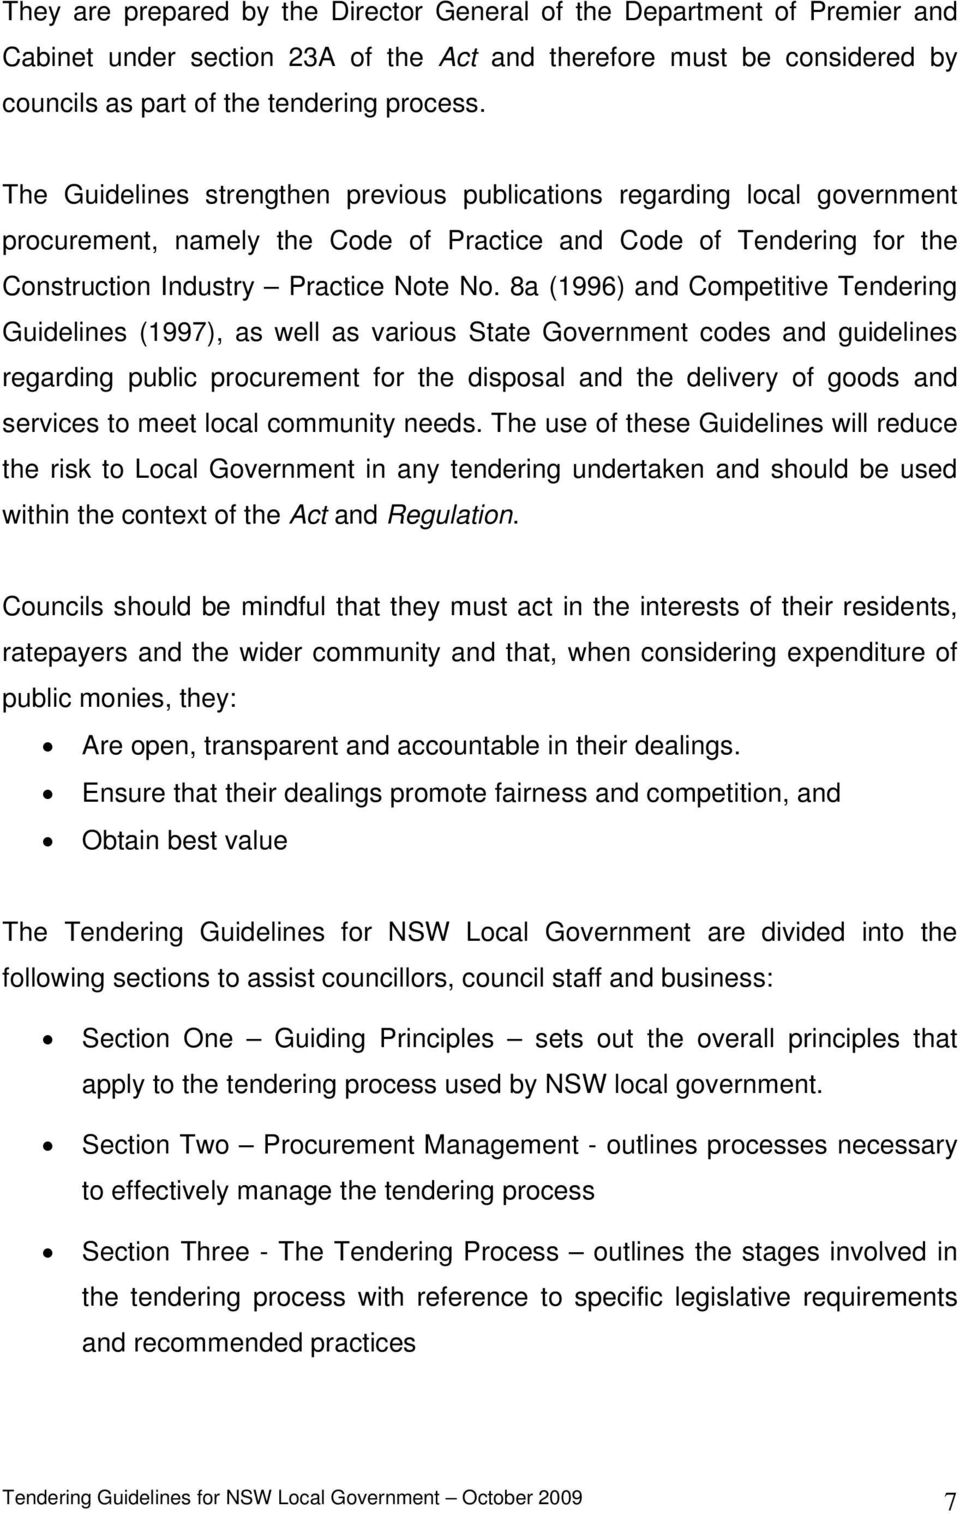 8a (1996) and Competitive Tendering Guidelines (1997), as well as various State Government codes and guidelines regarding public procurement for the disposal and the delivery of goods and services to